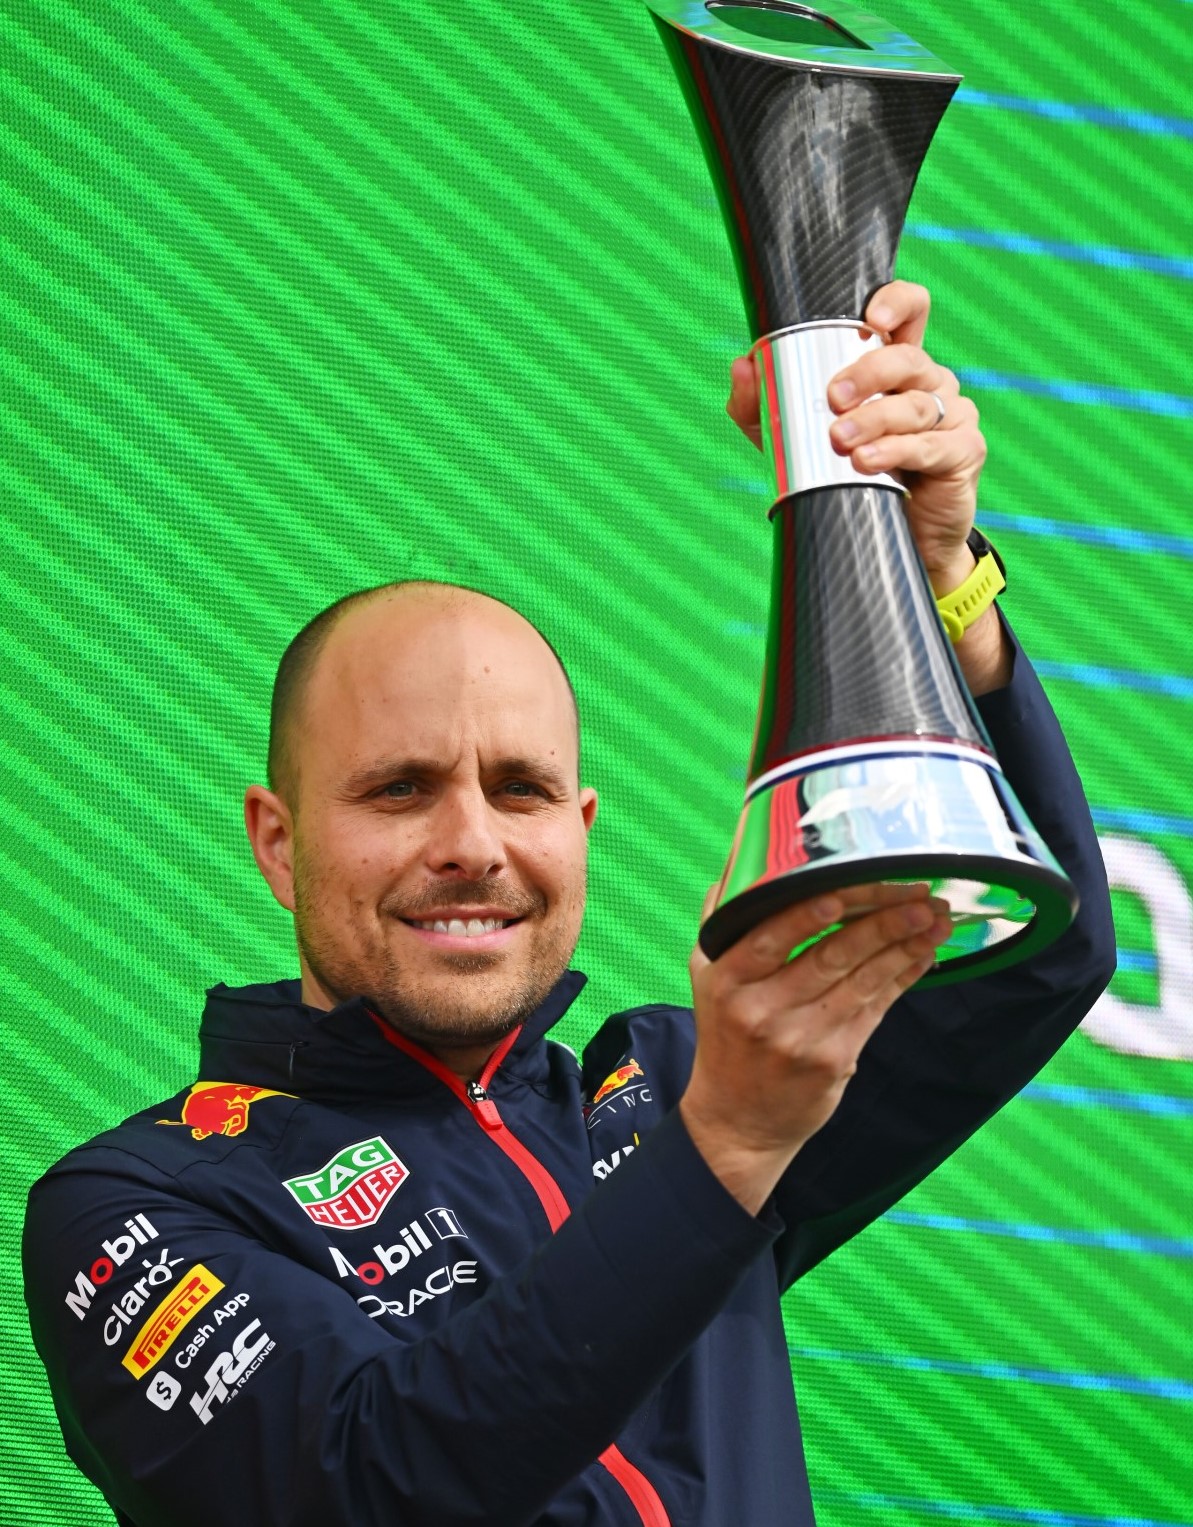 Red Bull Racing race engineer Gianpiero Lambiase celebrates with the constructors' race win trophy on the podium during the F1 Grand Prix of Great Britain at Silverstone Circuit on July 09, 2023 in Northampton, England. (Photo by Rudy Carezzevoli - Formula 1/Formula 1 via Getty Images) // Getty Images / Red Bull Content Pool //